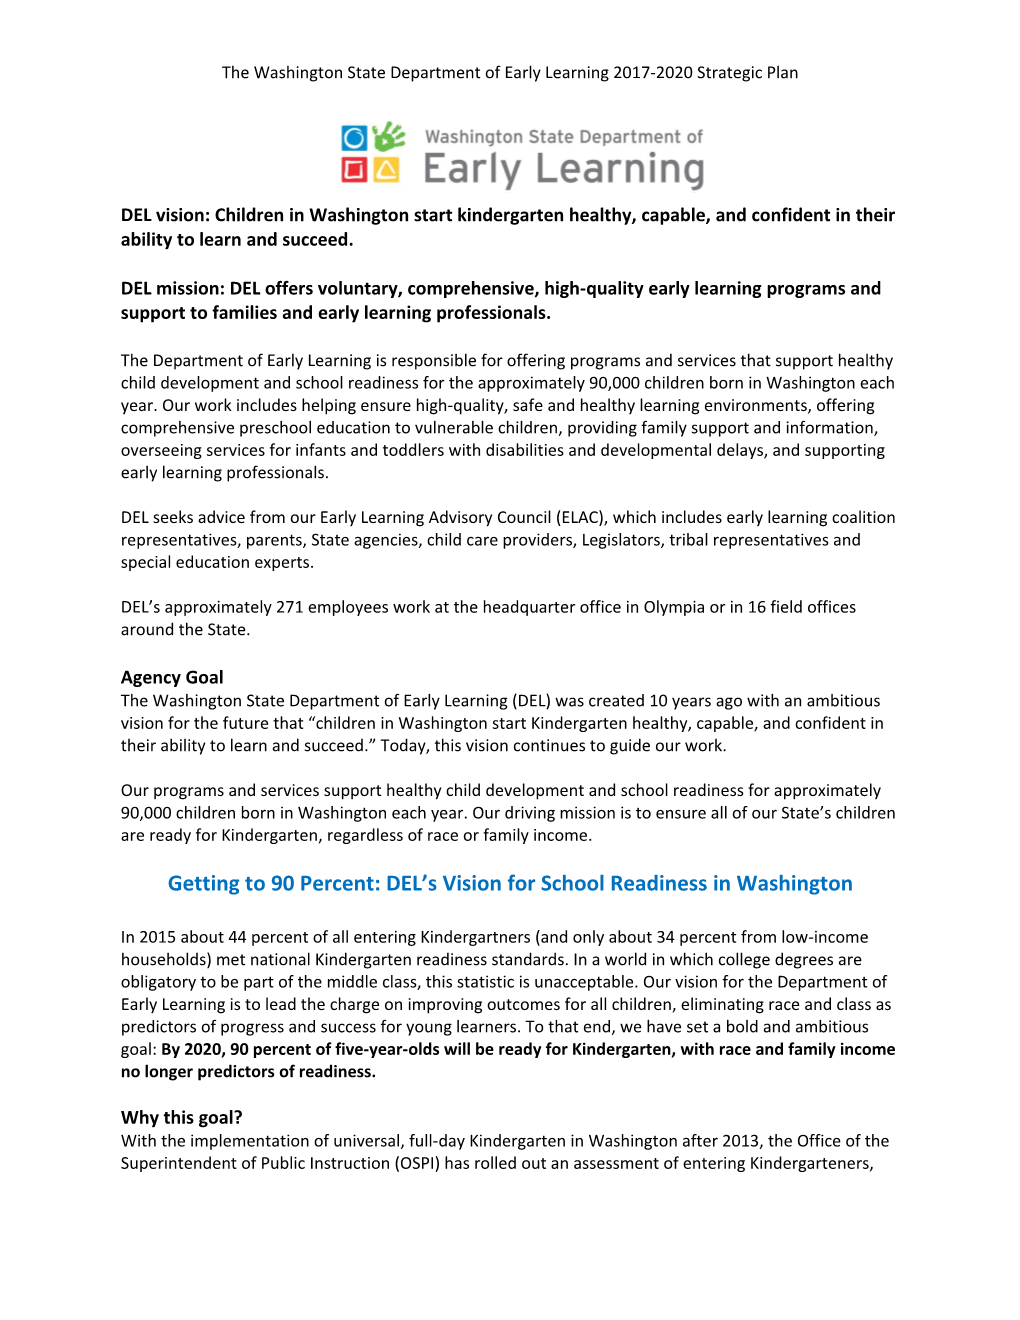 The Washington State Department of Early Learning 2017-2020 Strategic Plan